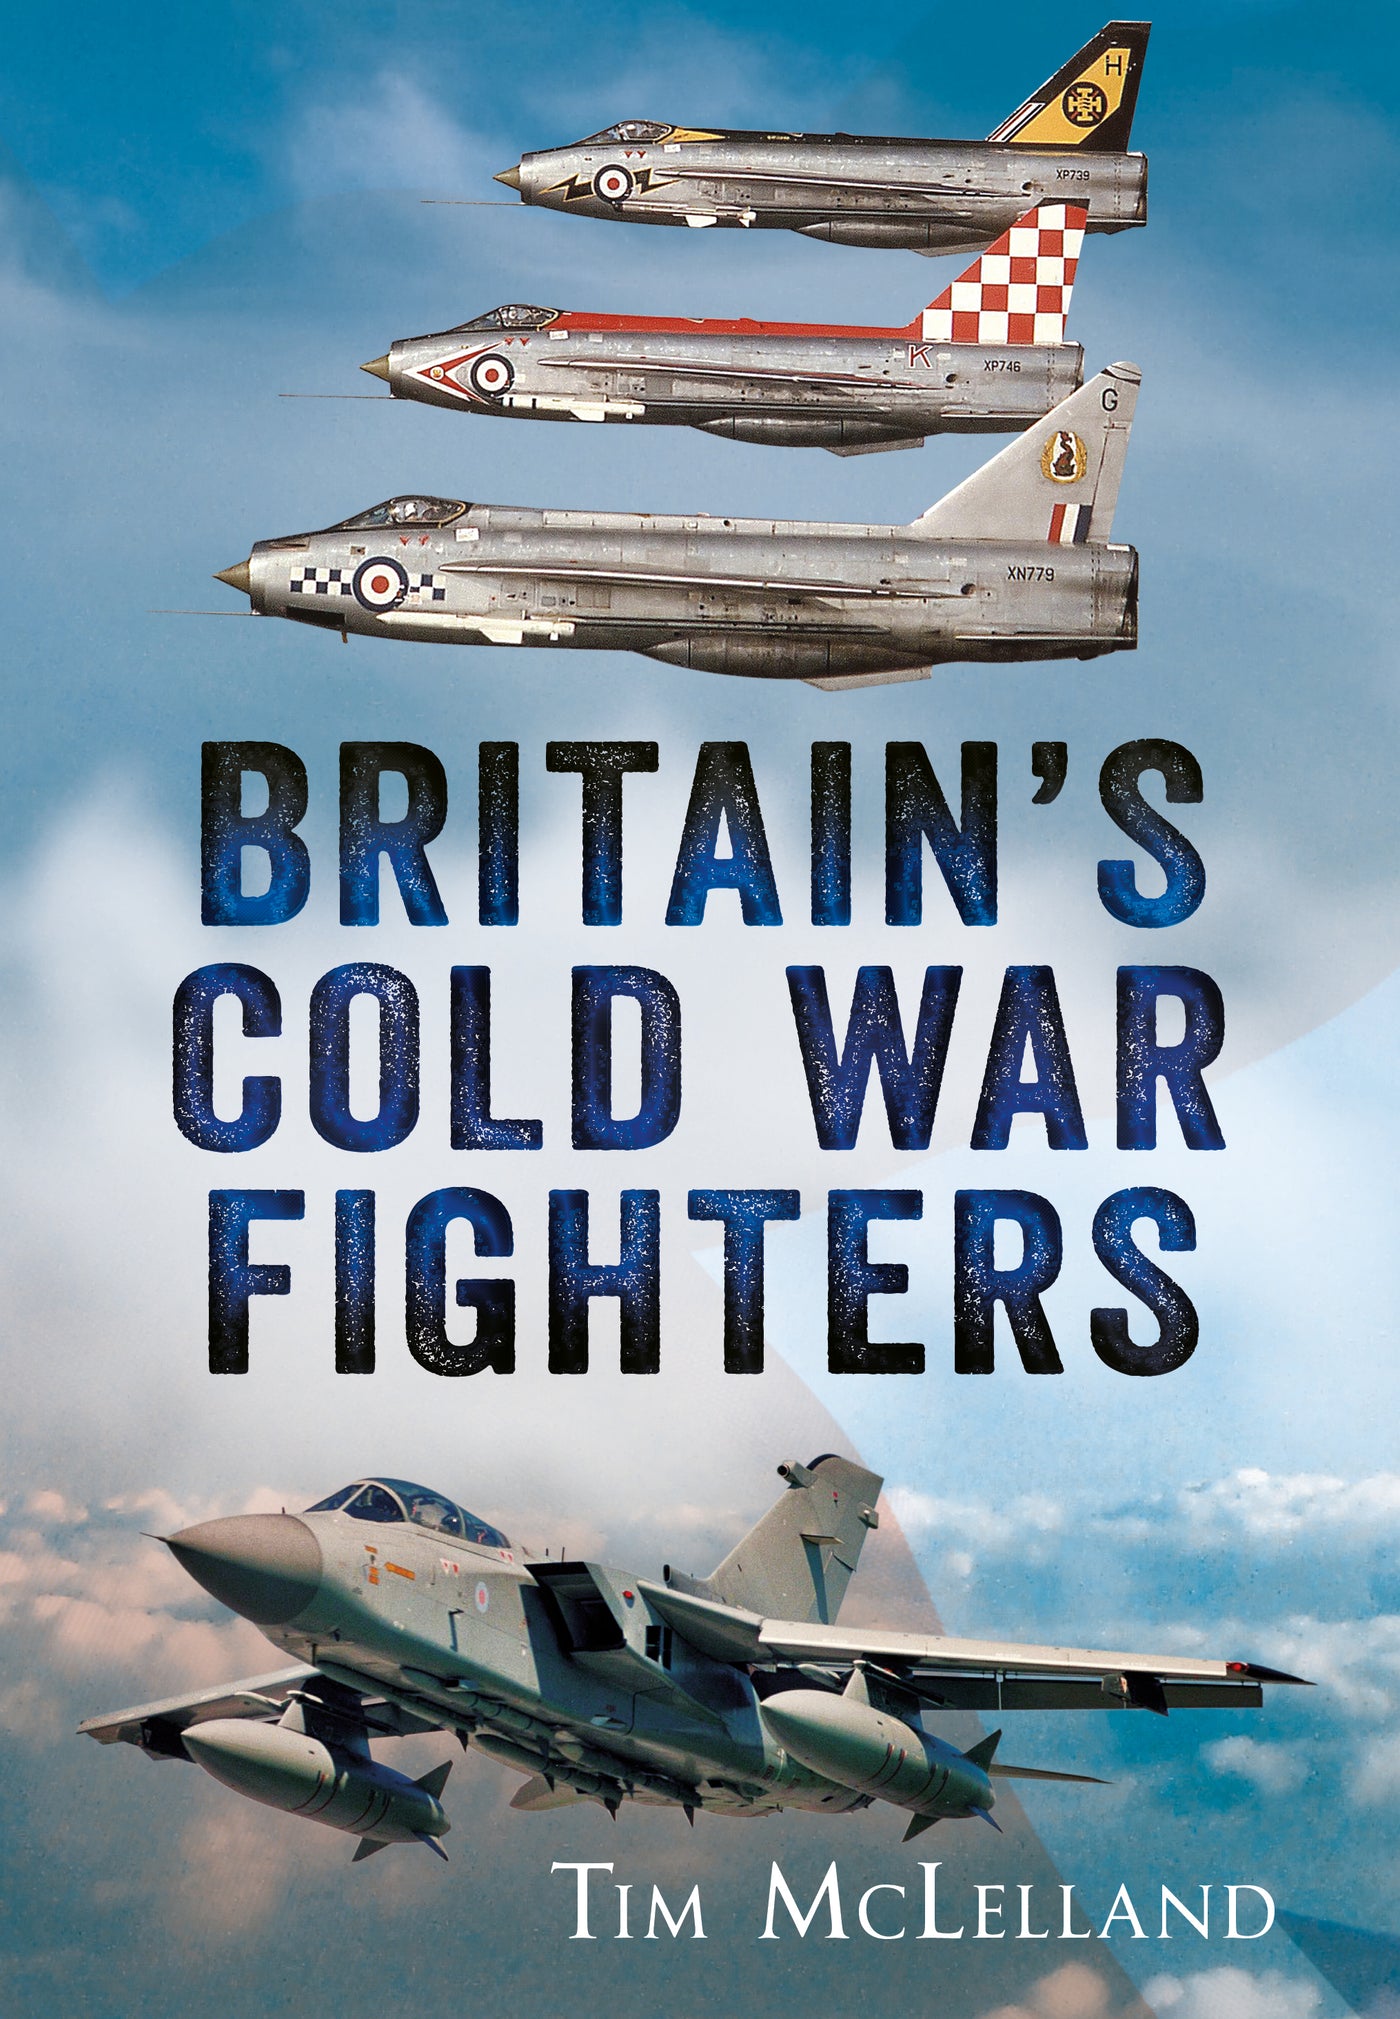 Britain's Cold War Fighters